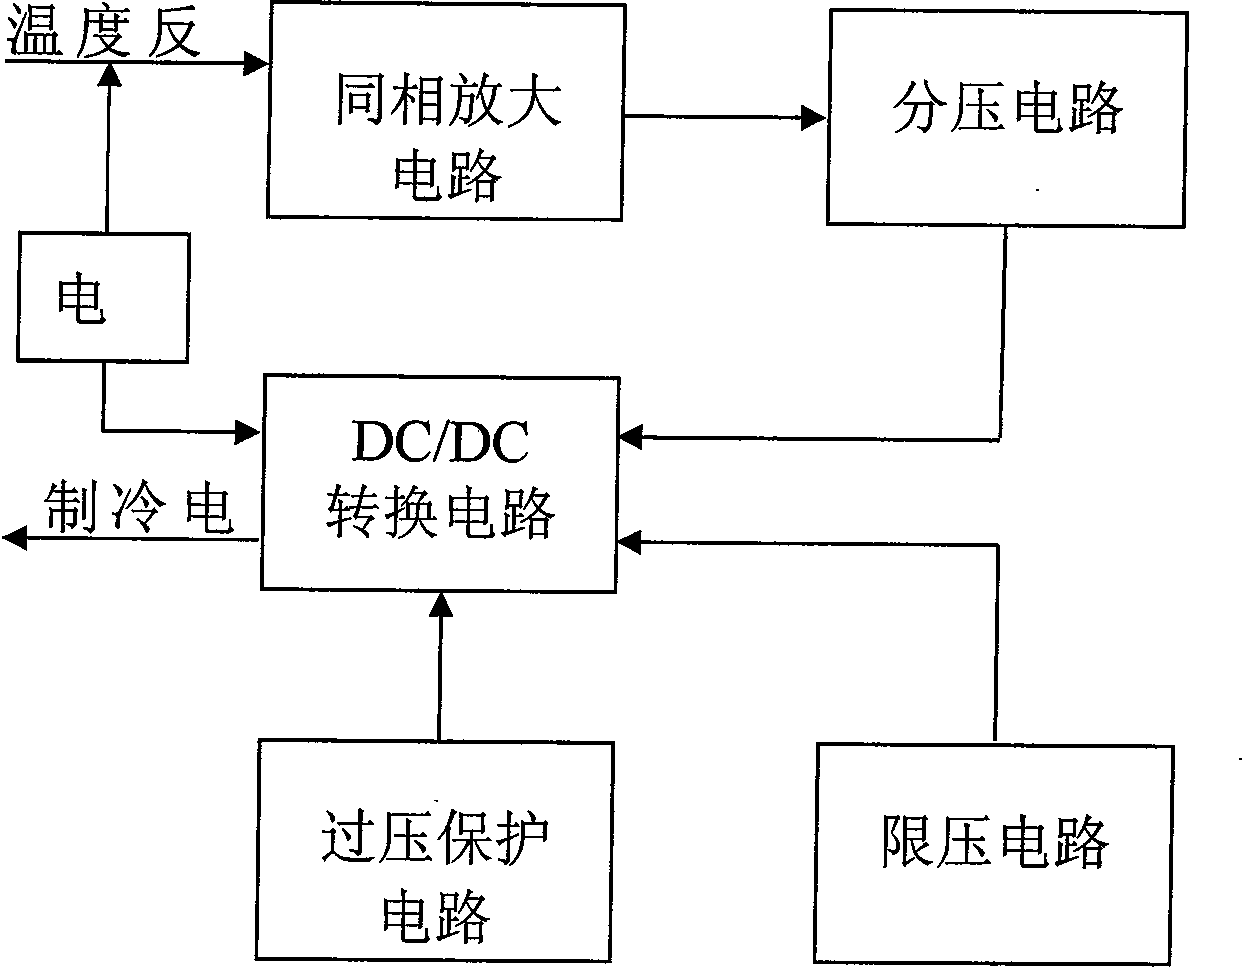 Refrigeration power control circuit for semiconductor detector